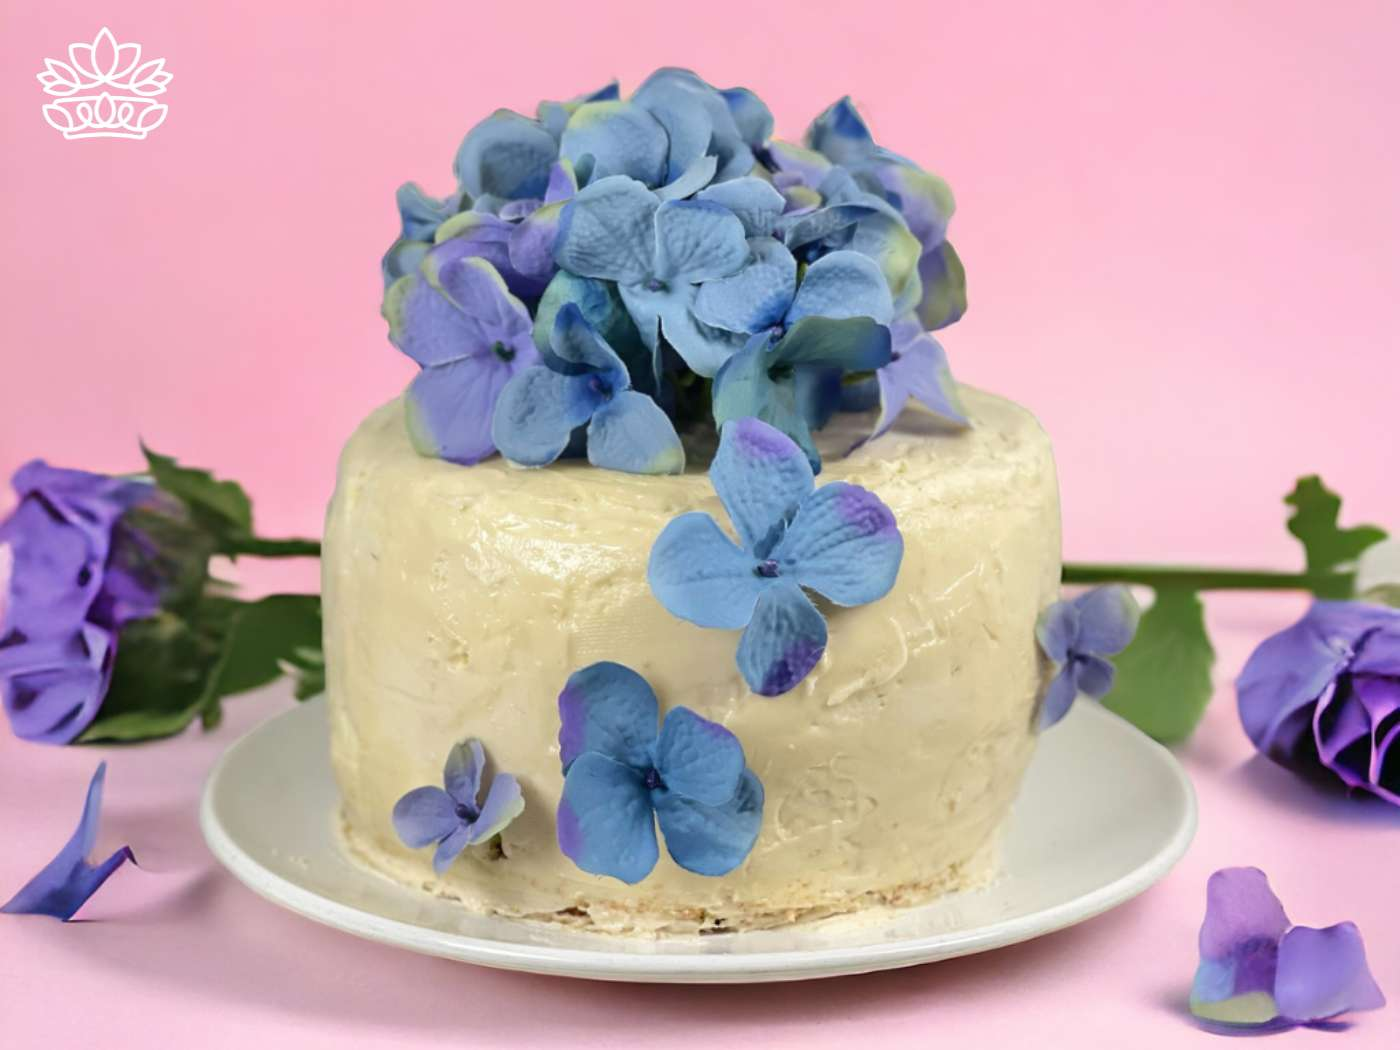 A delicate cake adorned with a cascade of blue hydrangea blossoms, set against a soft pink backdrop, a testament to the artistic bakery paired with floristry at Fabulous Flowers and Gifts.